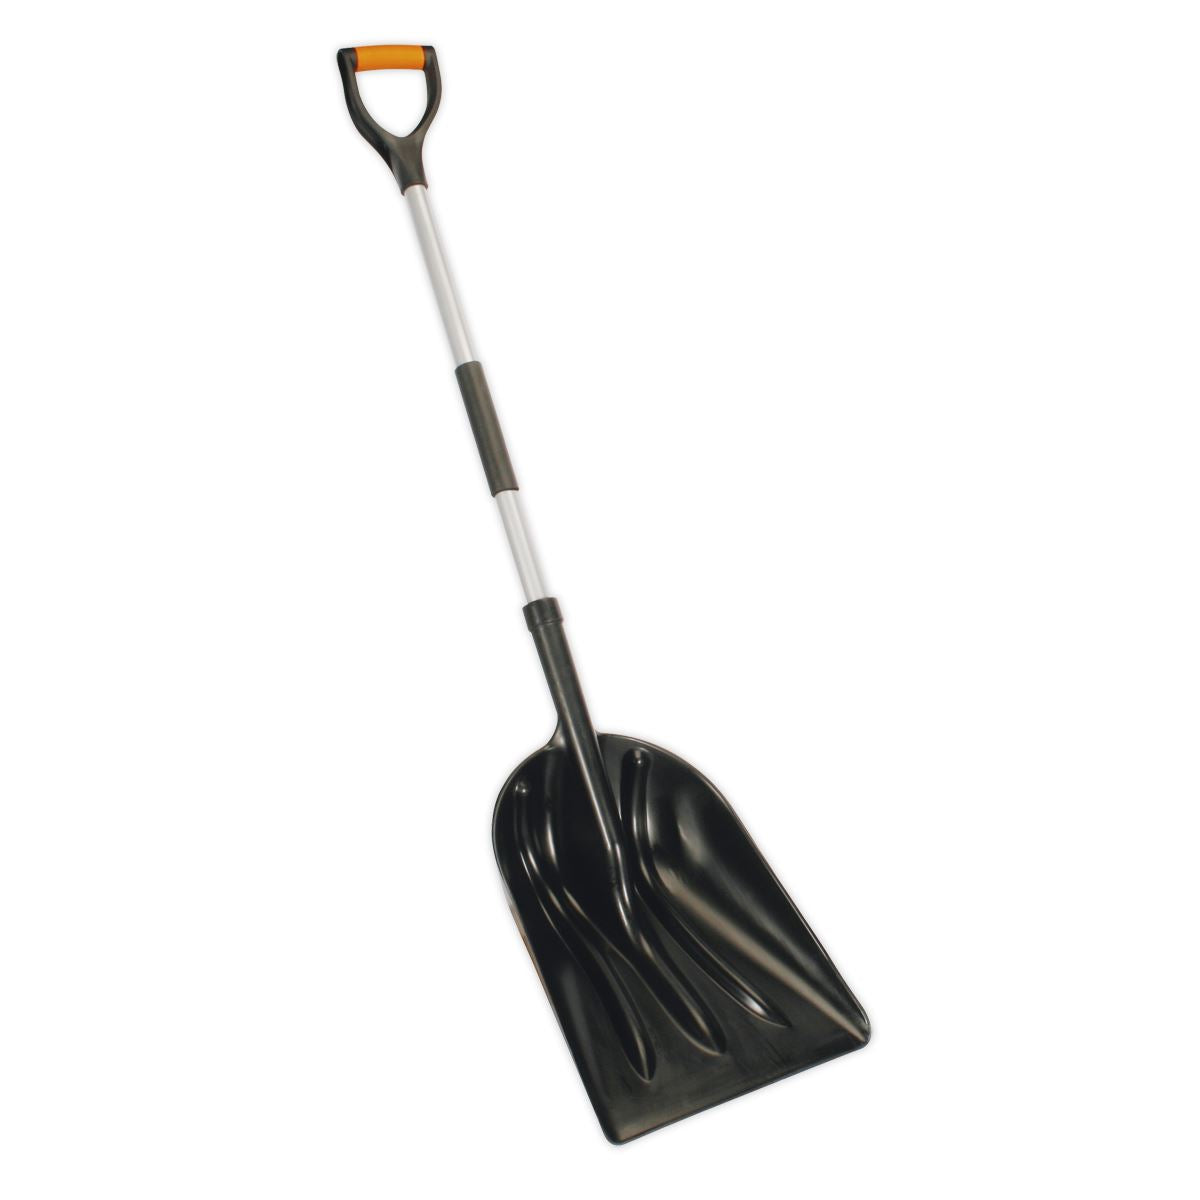 Sealey General-Purpose Shovel with 900mm Metal Handle